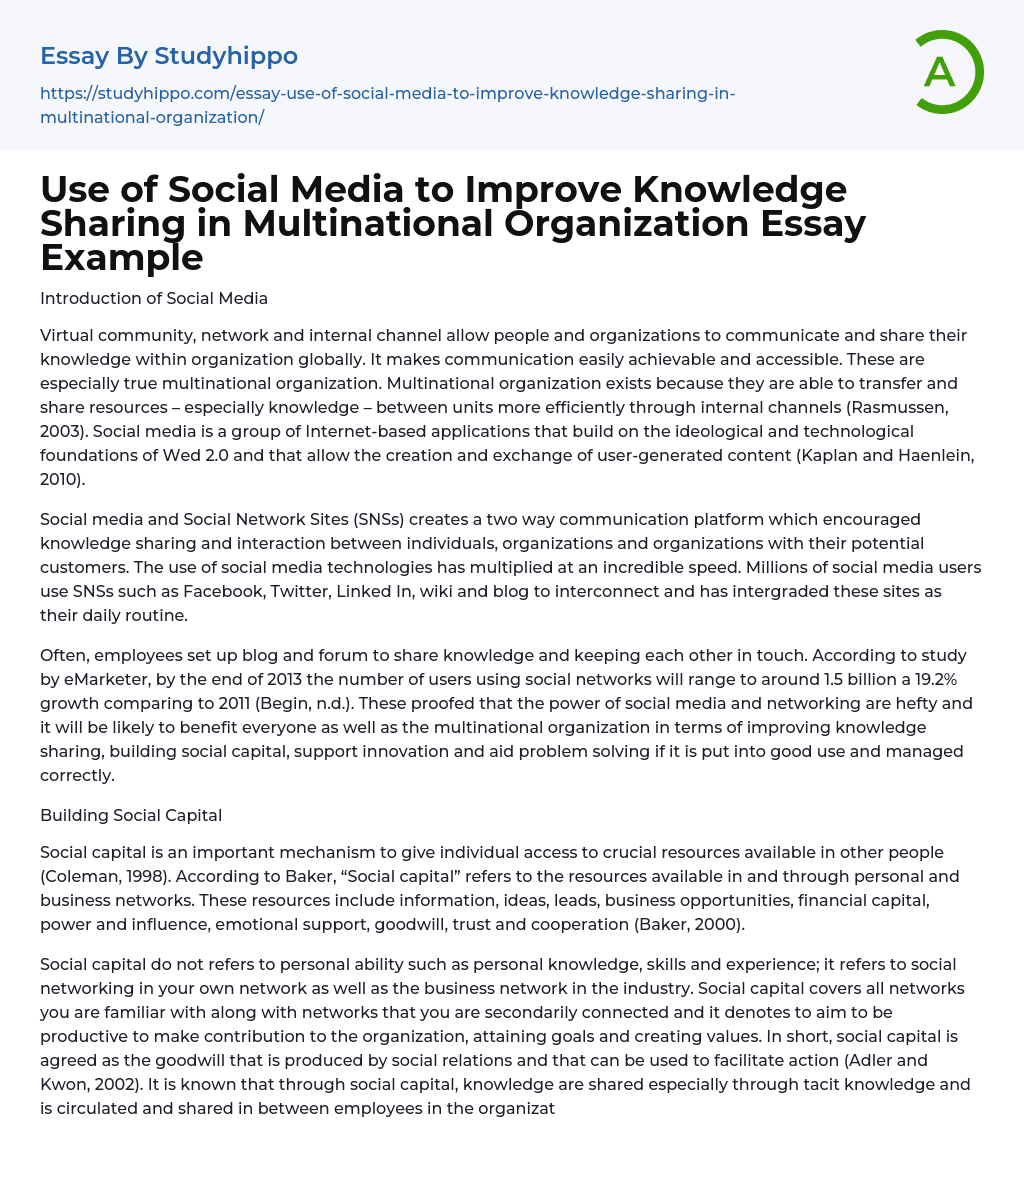 Use of Social Media to Improve Knowledge Sharing in Multinational Organization Essay Example